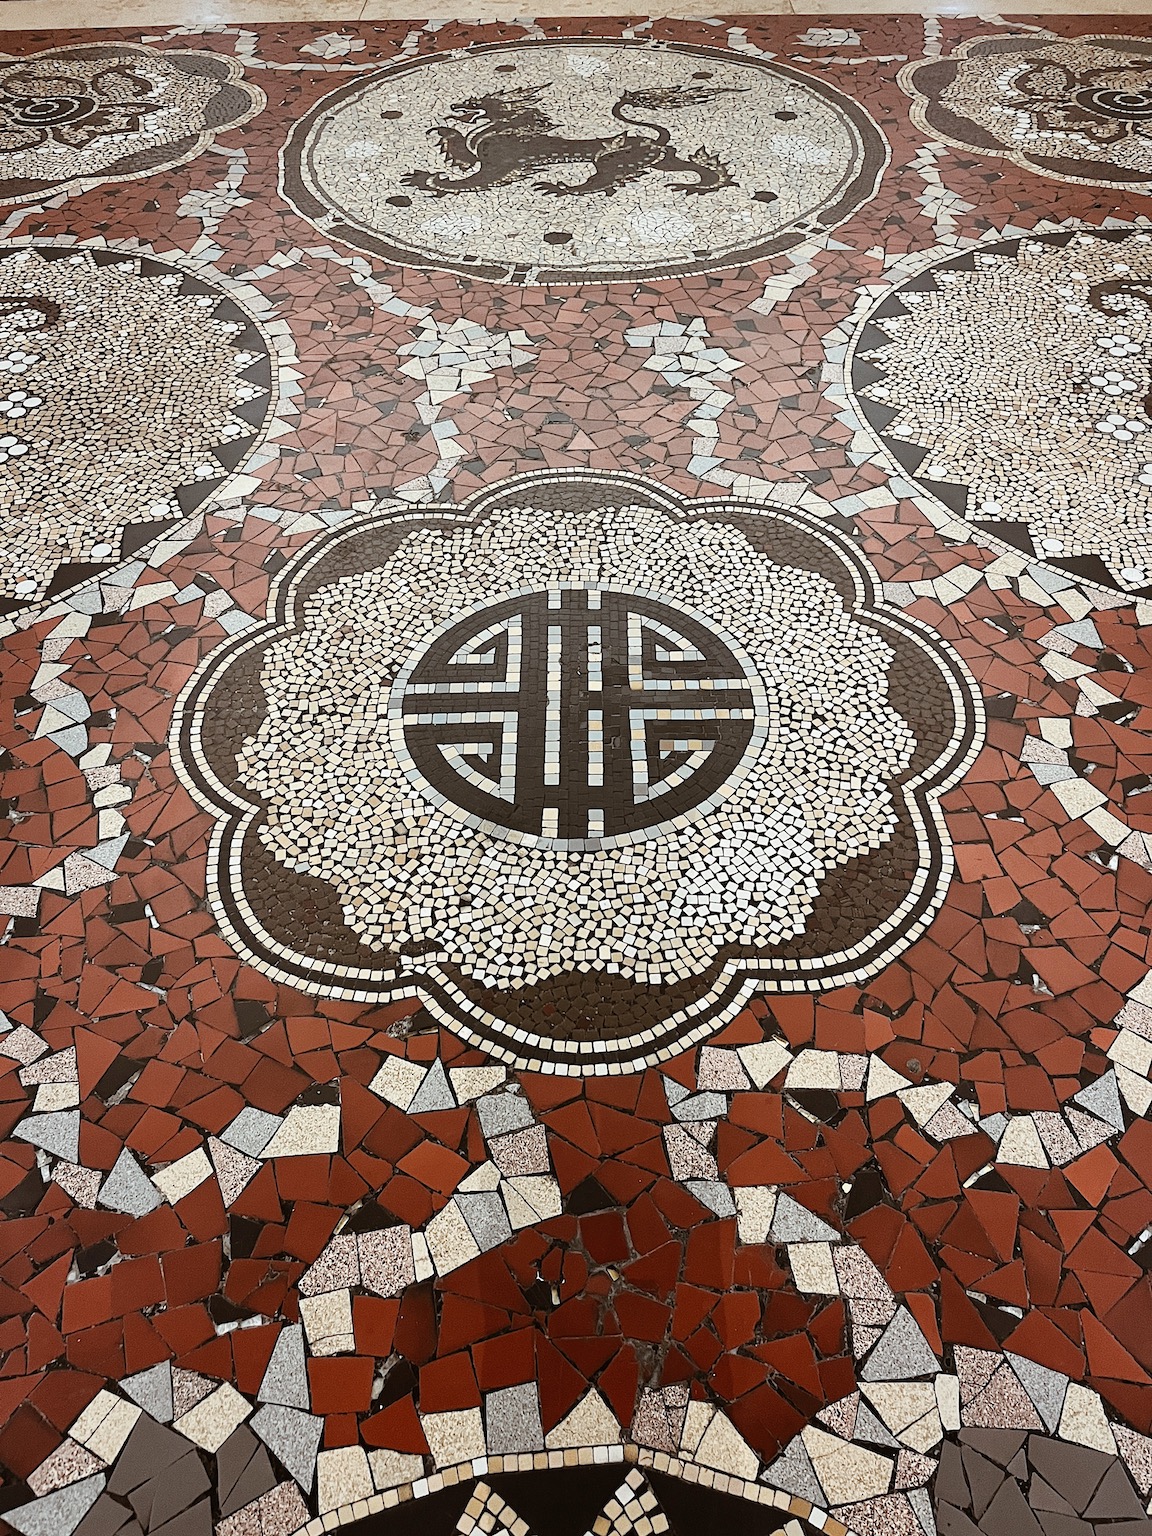 Photography of the mosaic patterns of the ground of the Immigration History Museum.